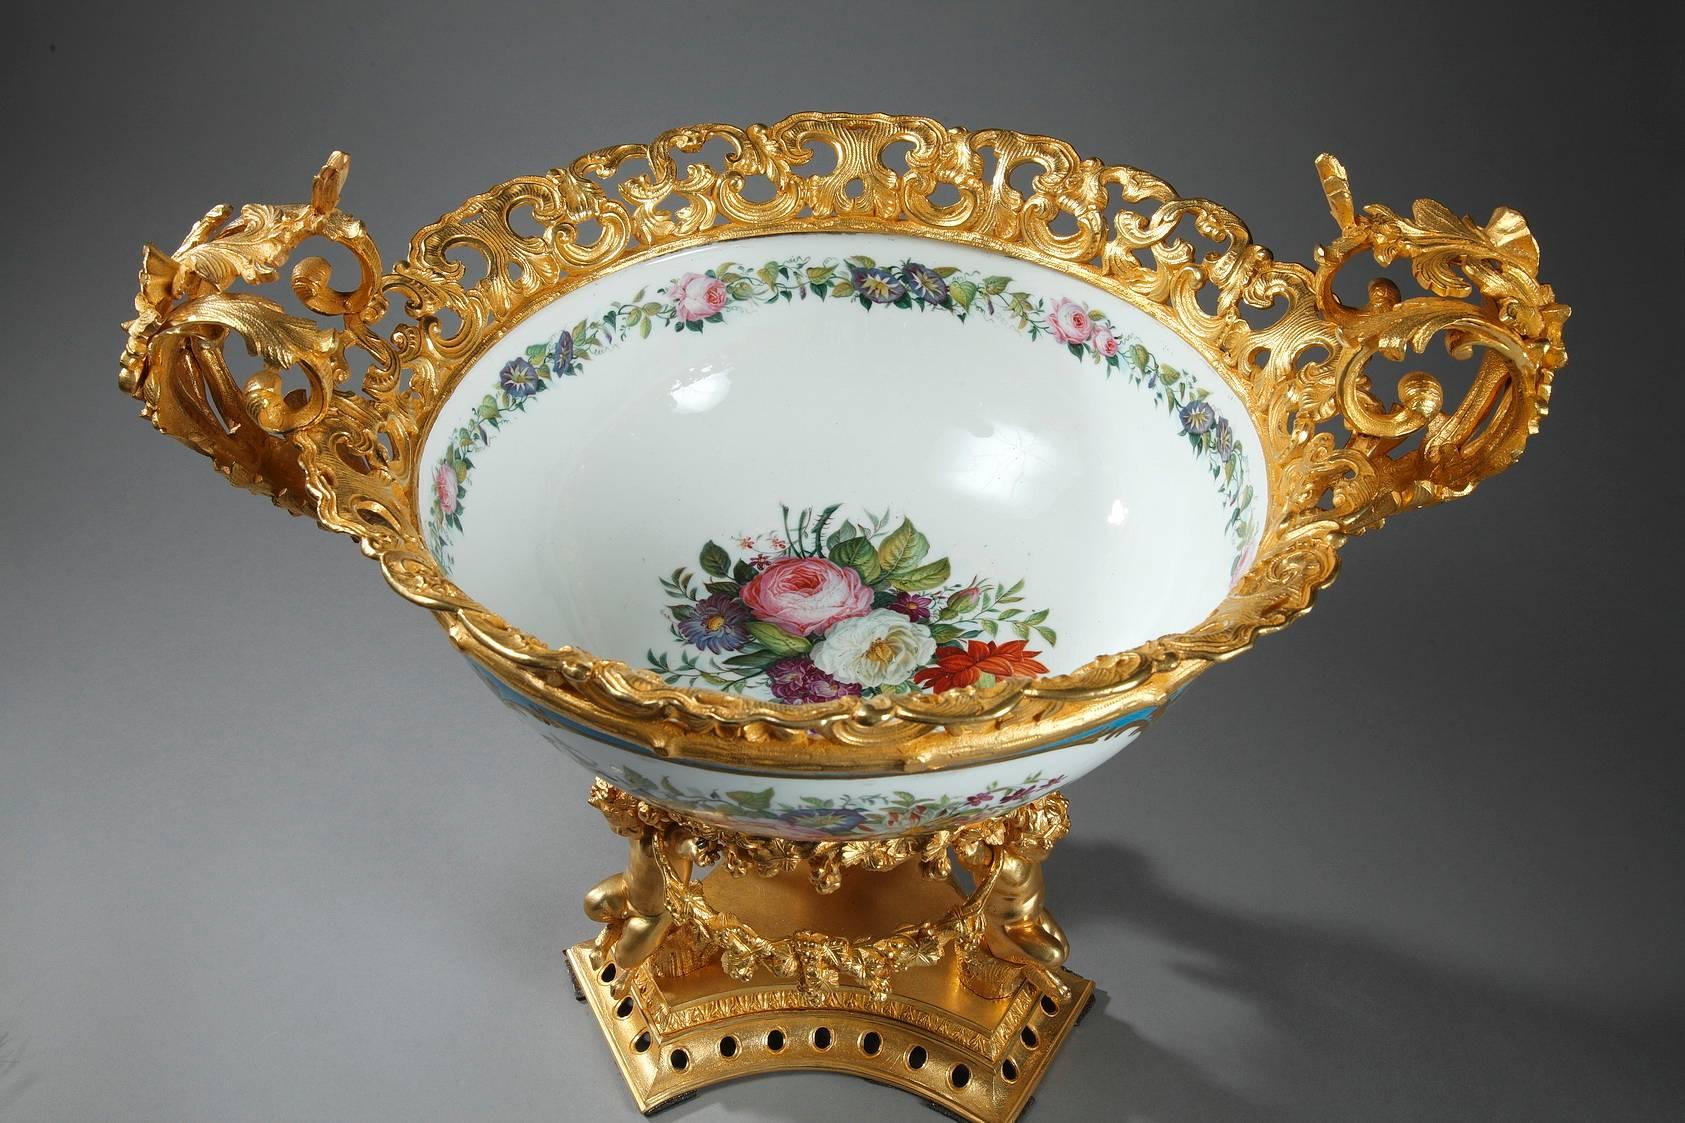 Substantial porcelain pedestal bowl embellished with white medallions set on a sky blue background. On one side of the bowl, the medallion is decorated with a pastoral scene depicting a courting couple, and on the other side, the medallion displays